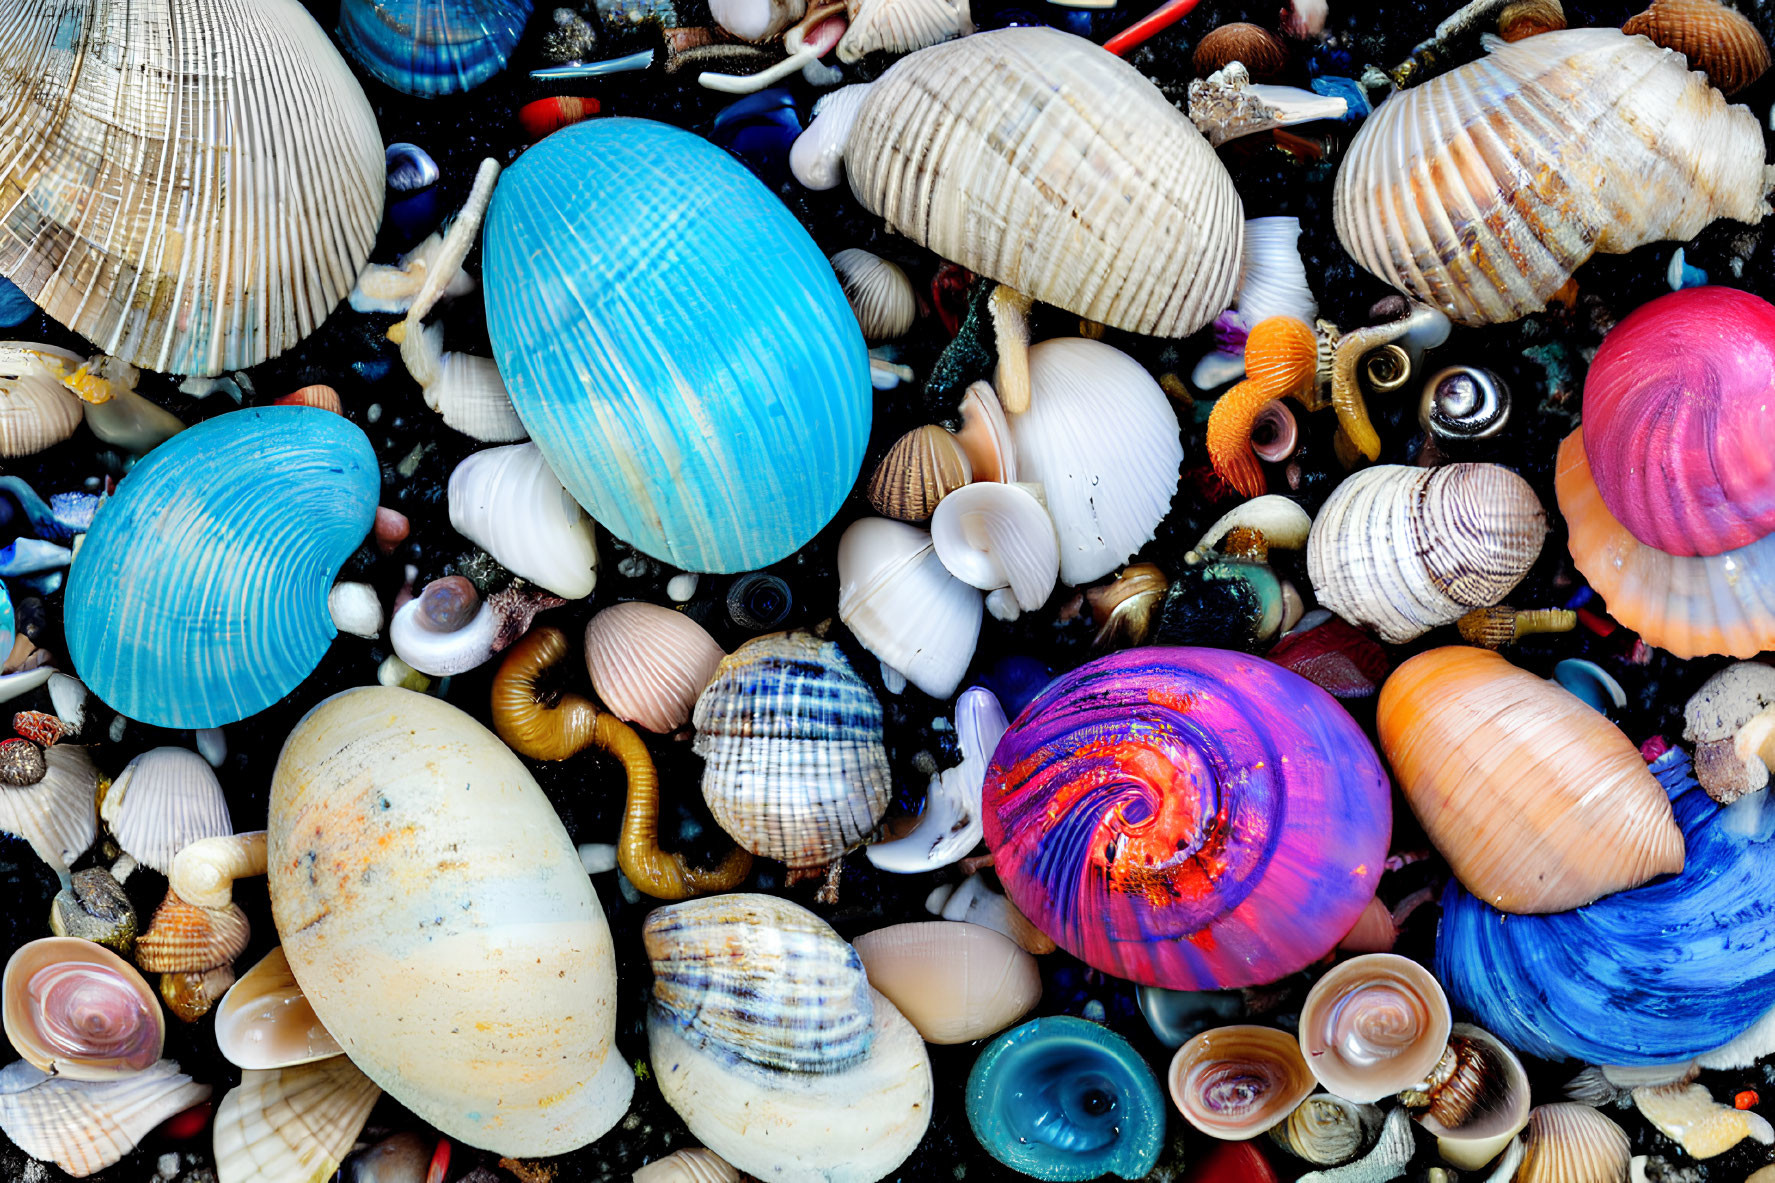 Assorted Seashell Collection in Blue, Orange, and White